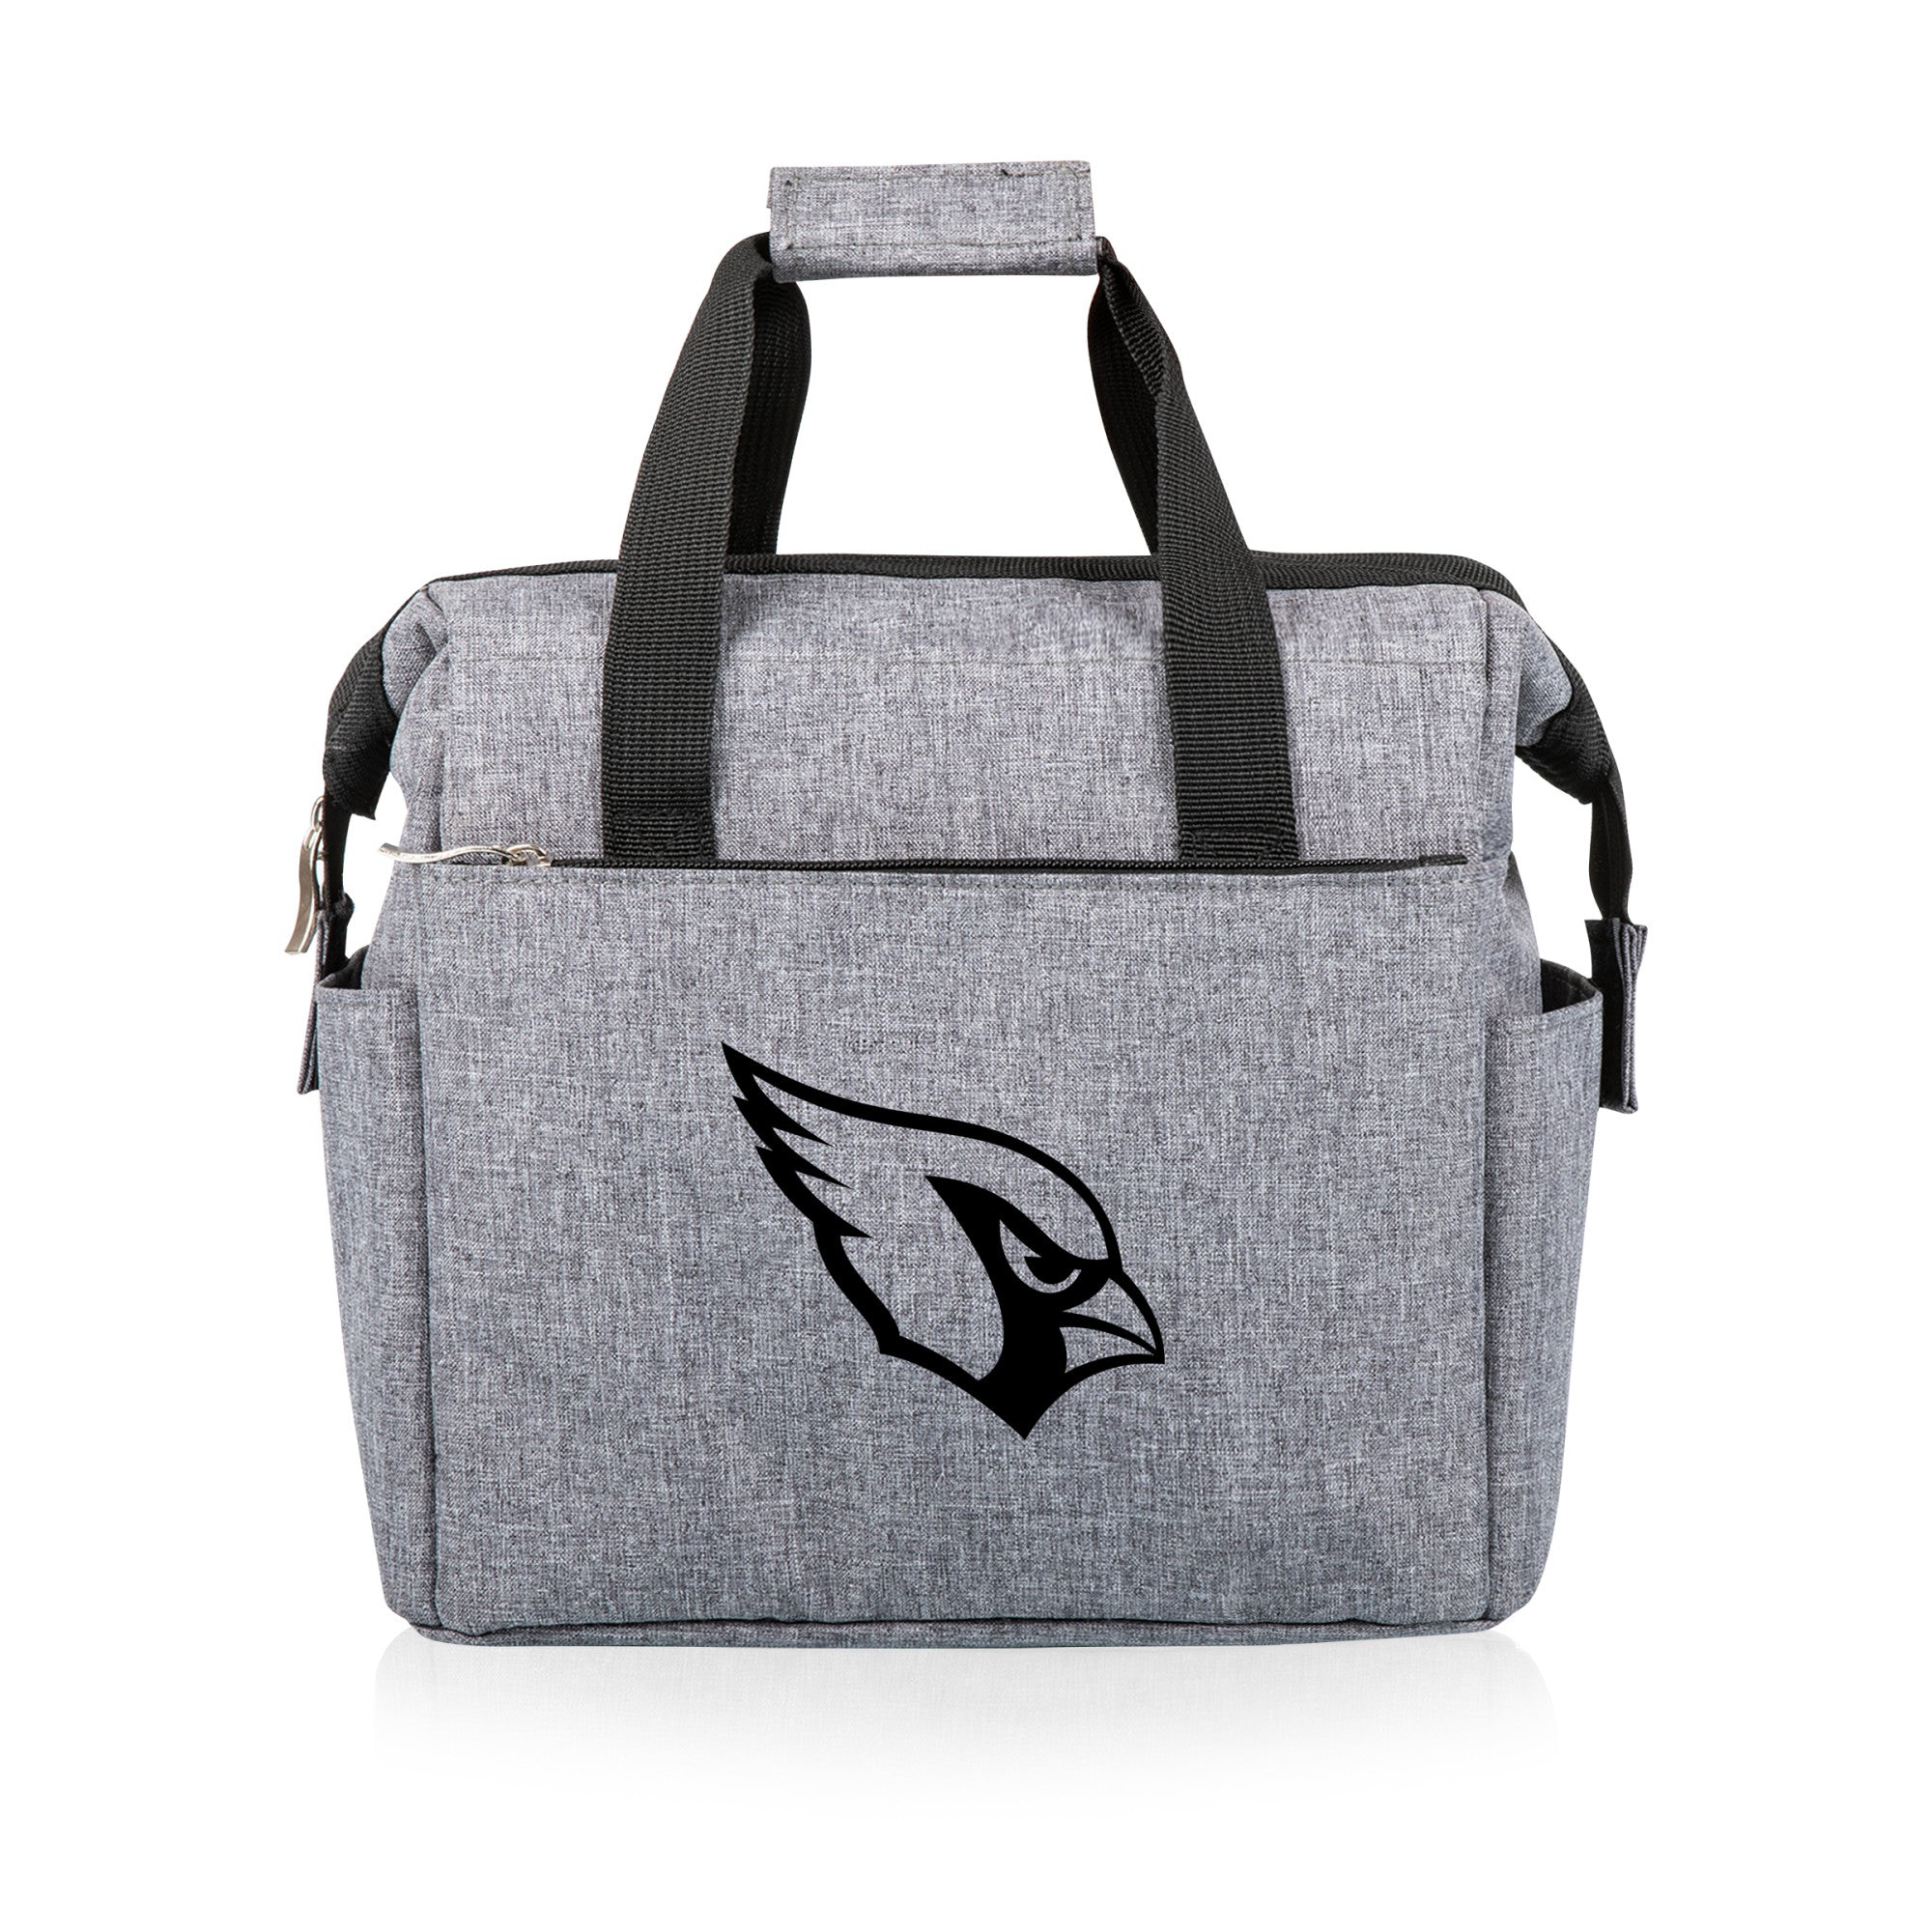 Arizona Cardinals - On The Go Lunch Cooler, (Heathered Gray)